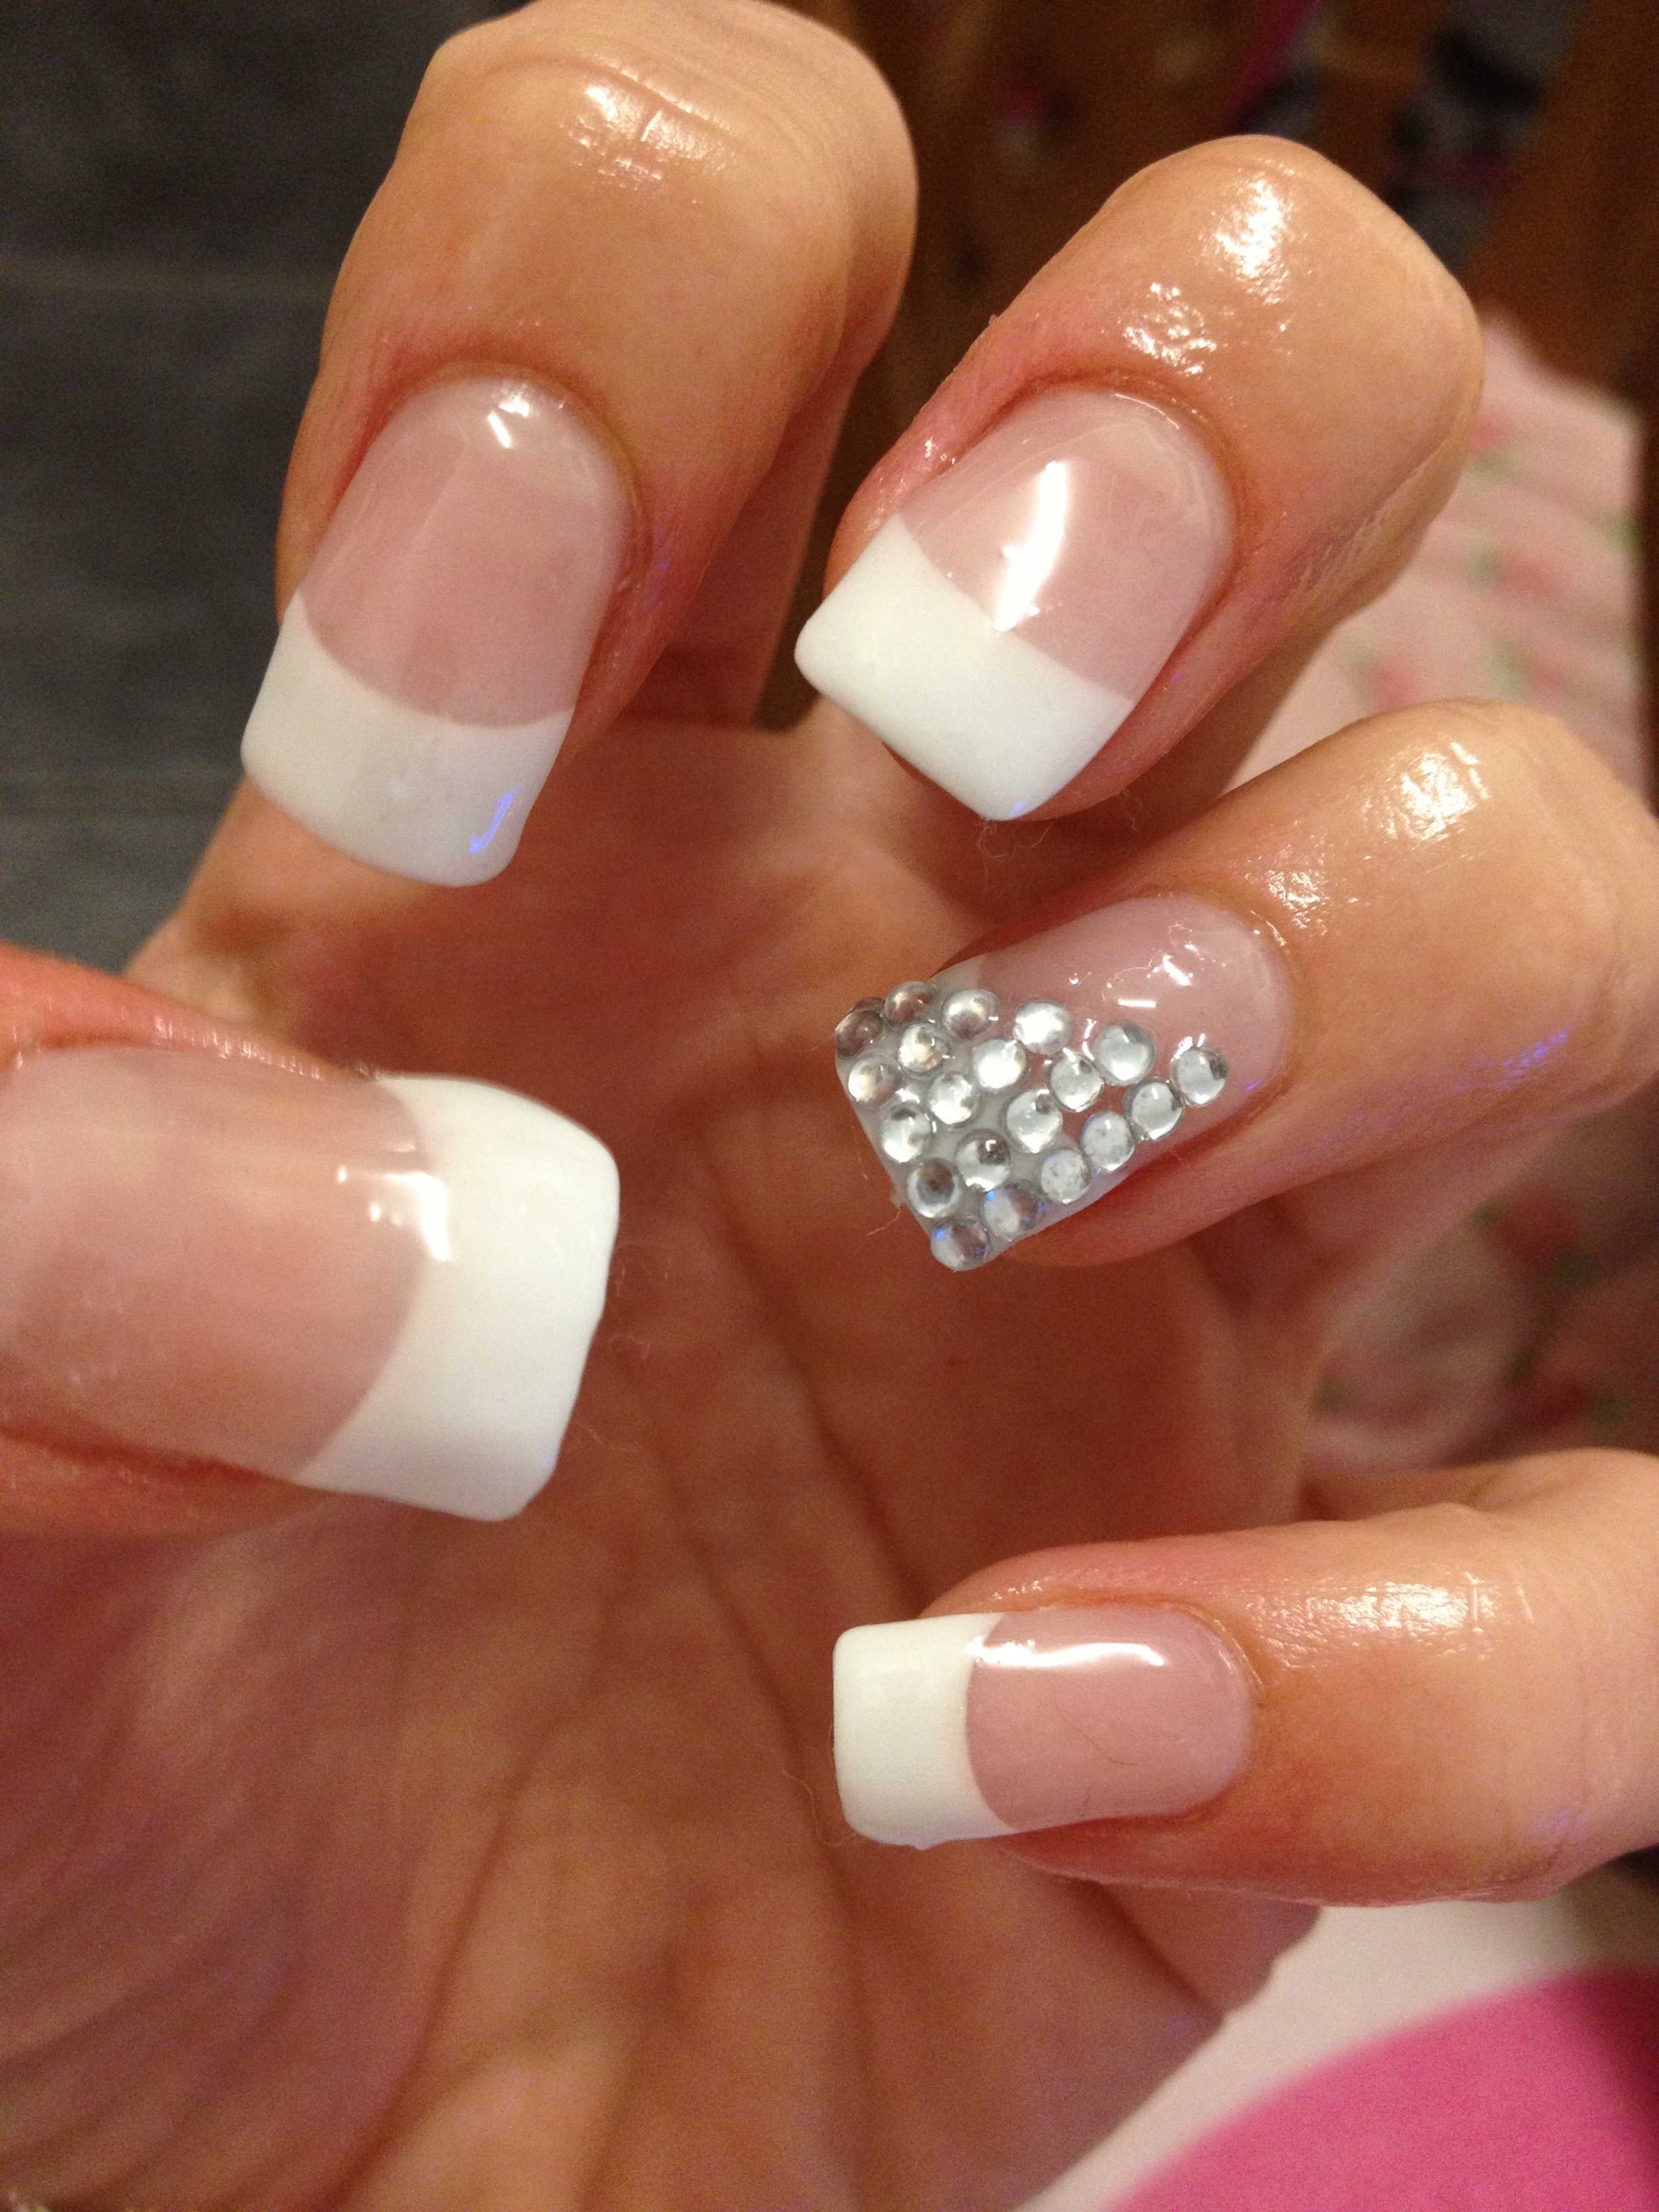 French tips with gems  beautifulcuticles